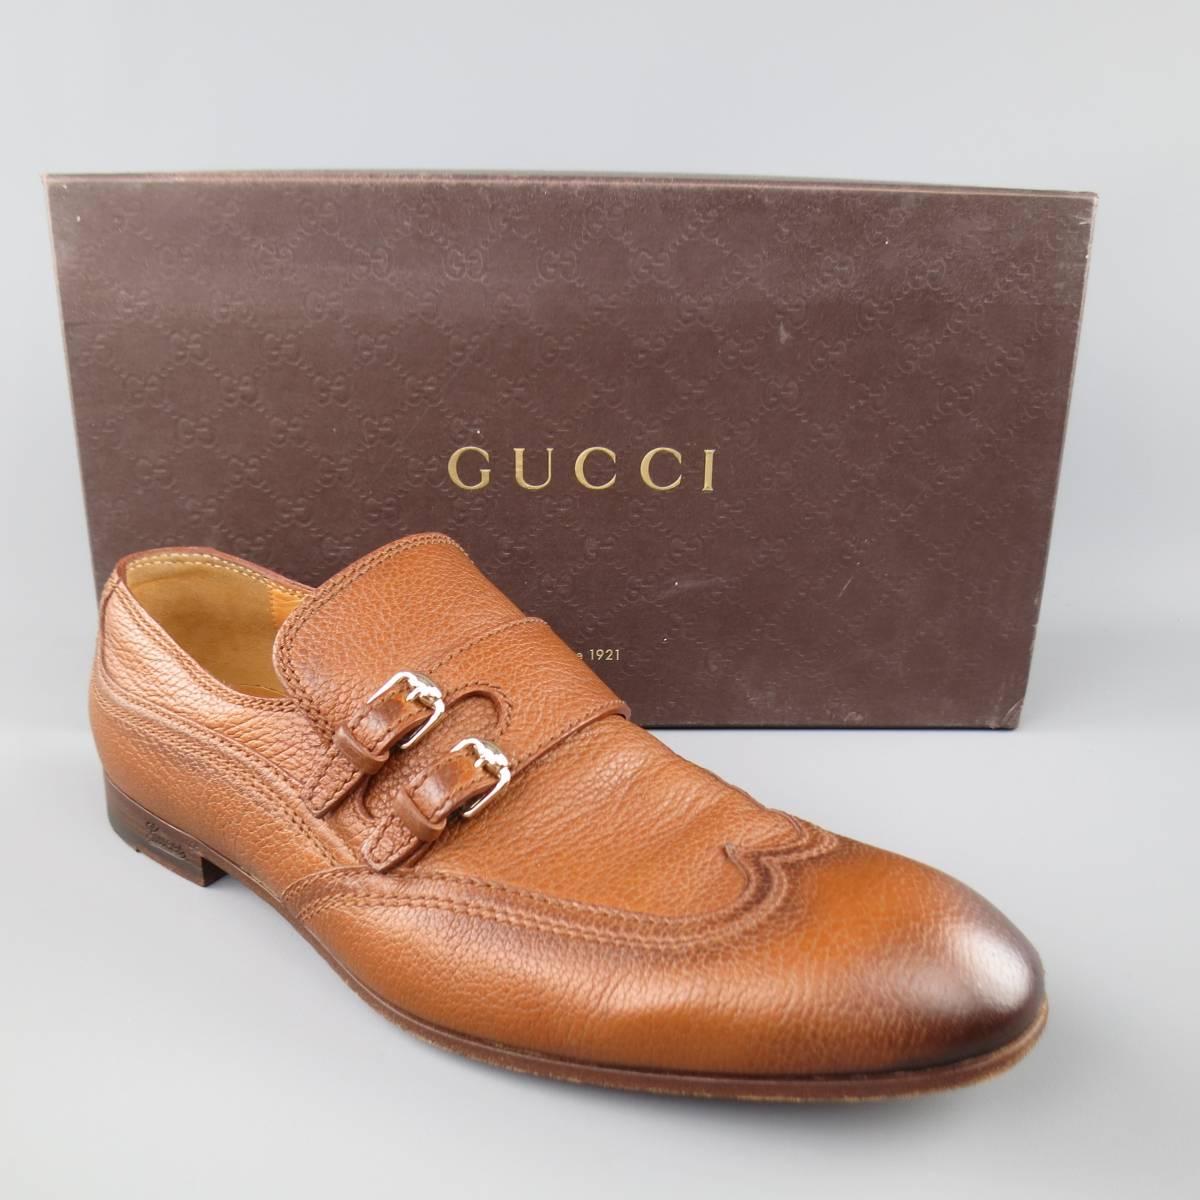 GUCCI Loafers consists of leather material in a tan color tone. Designed in a double monk-strap with silver buckles. Tone-on-tone stitching, burnish color pattern. Leather lining and sole. Comes with original box and cloth bag. Made in Italy.
 
Good